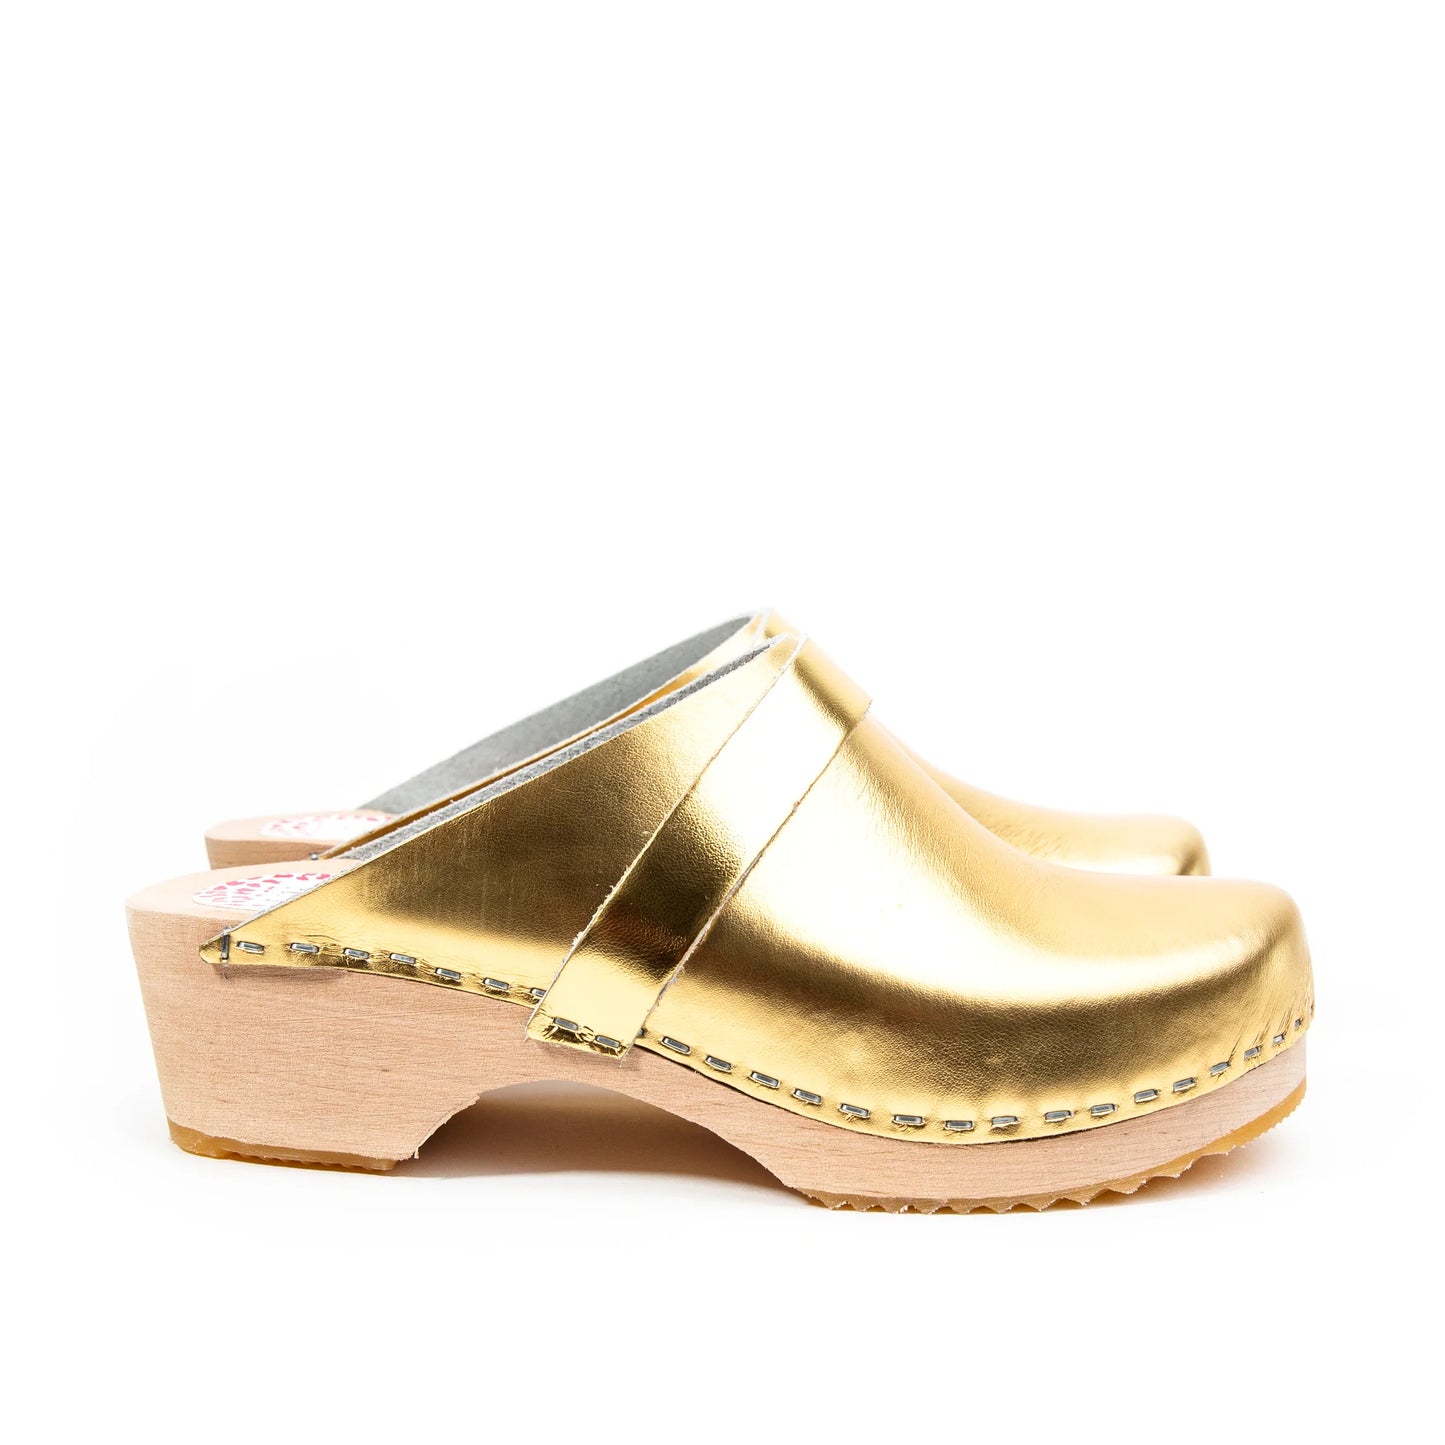 Gold Leather & Wood Handmade Clogs